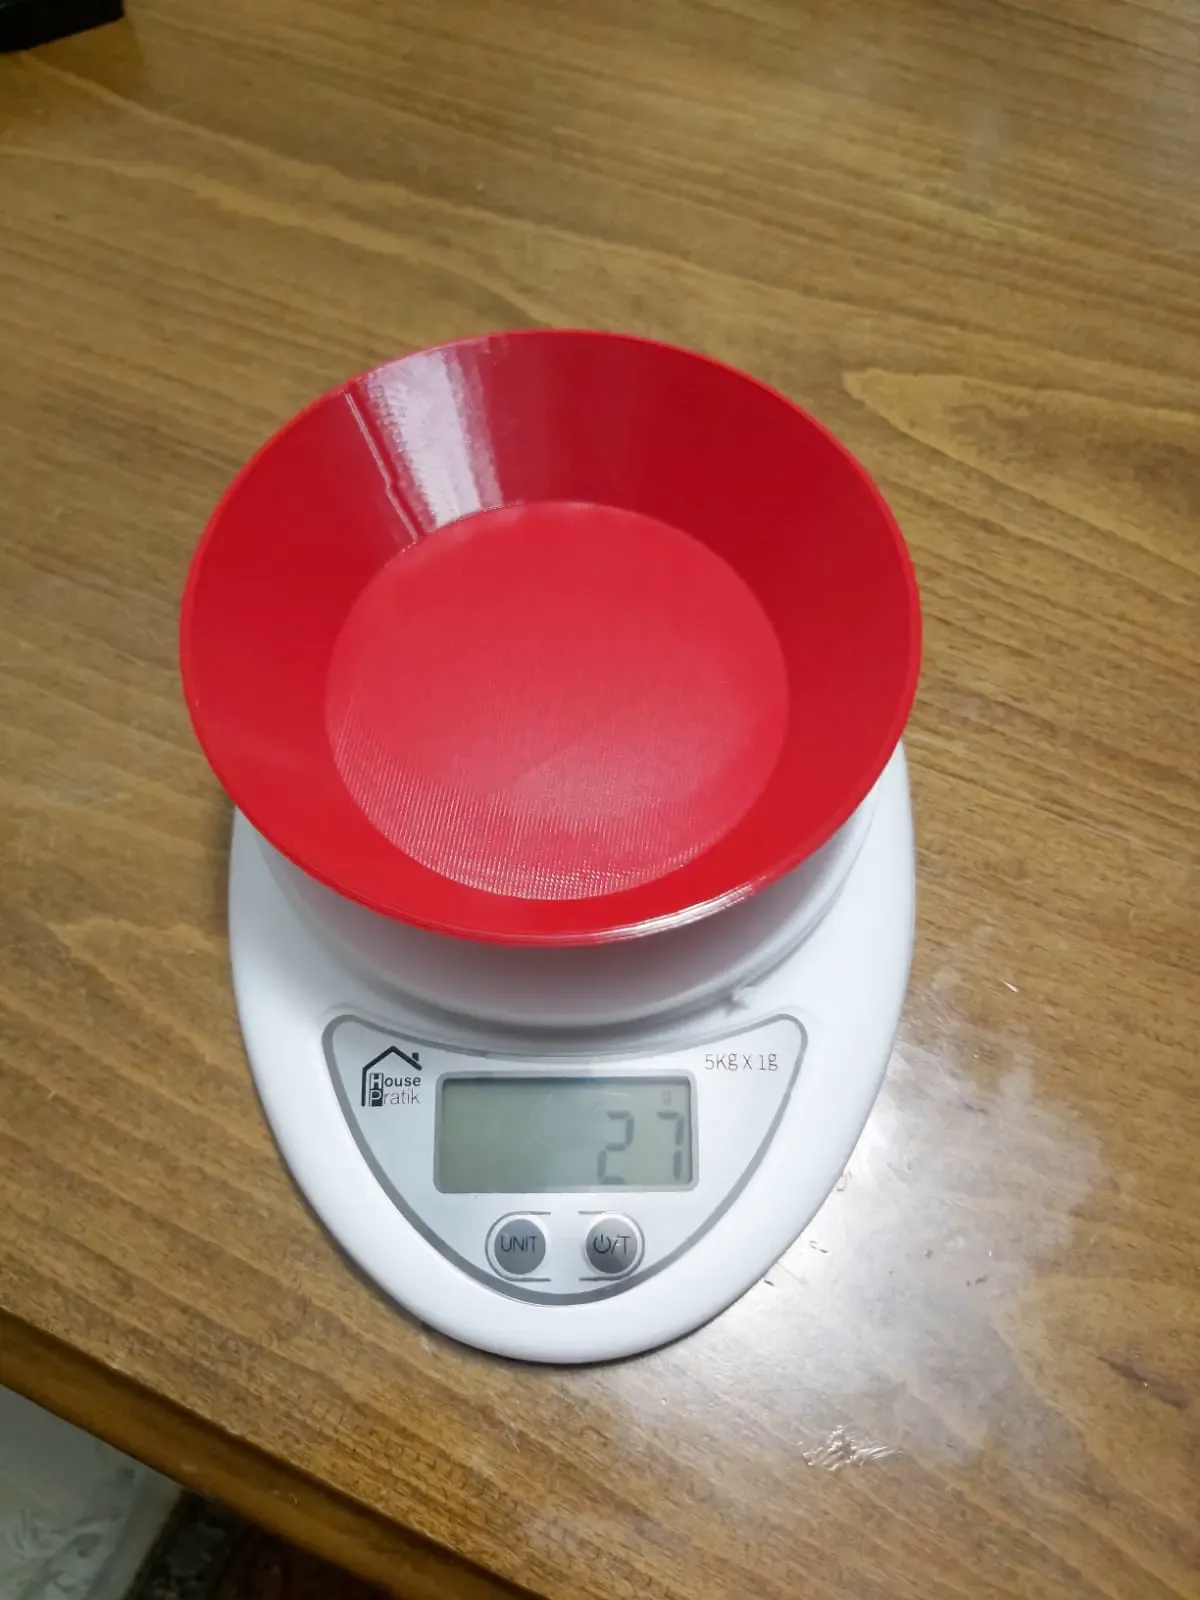 vessel for weighing machine